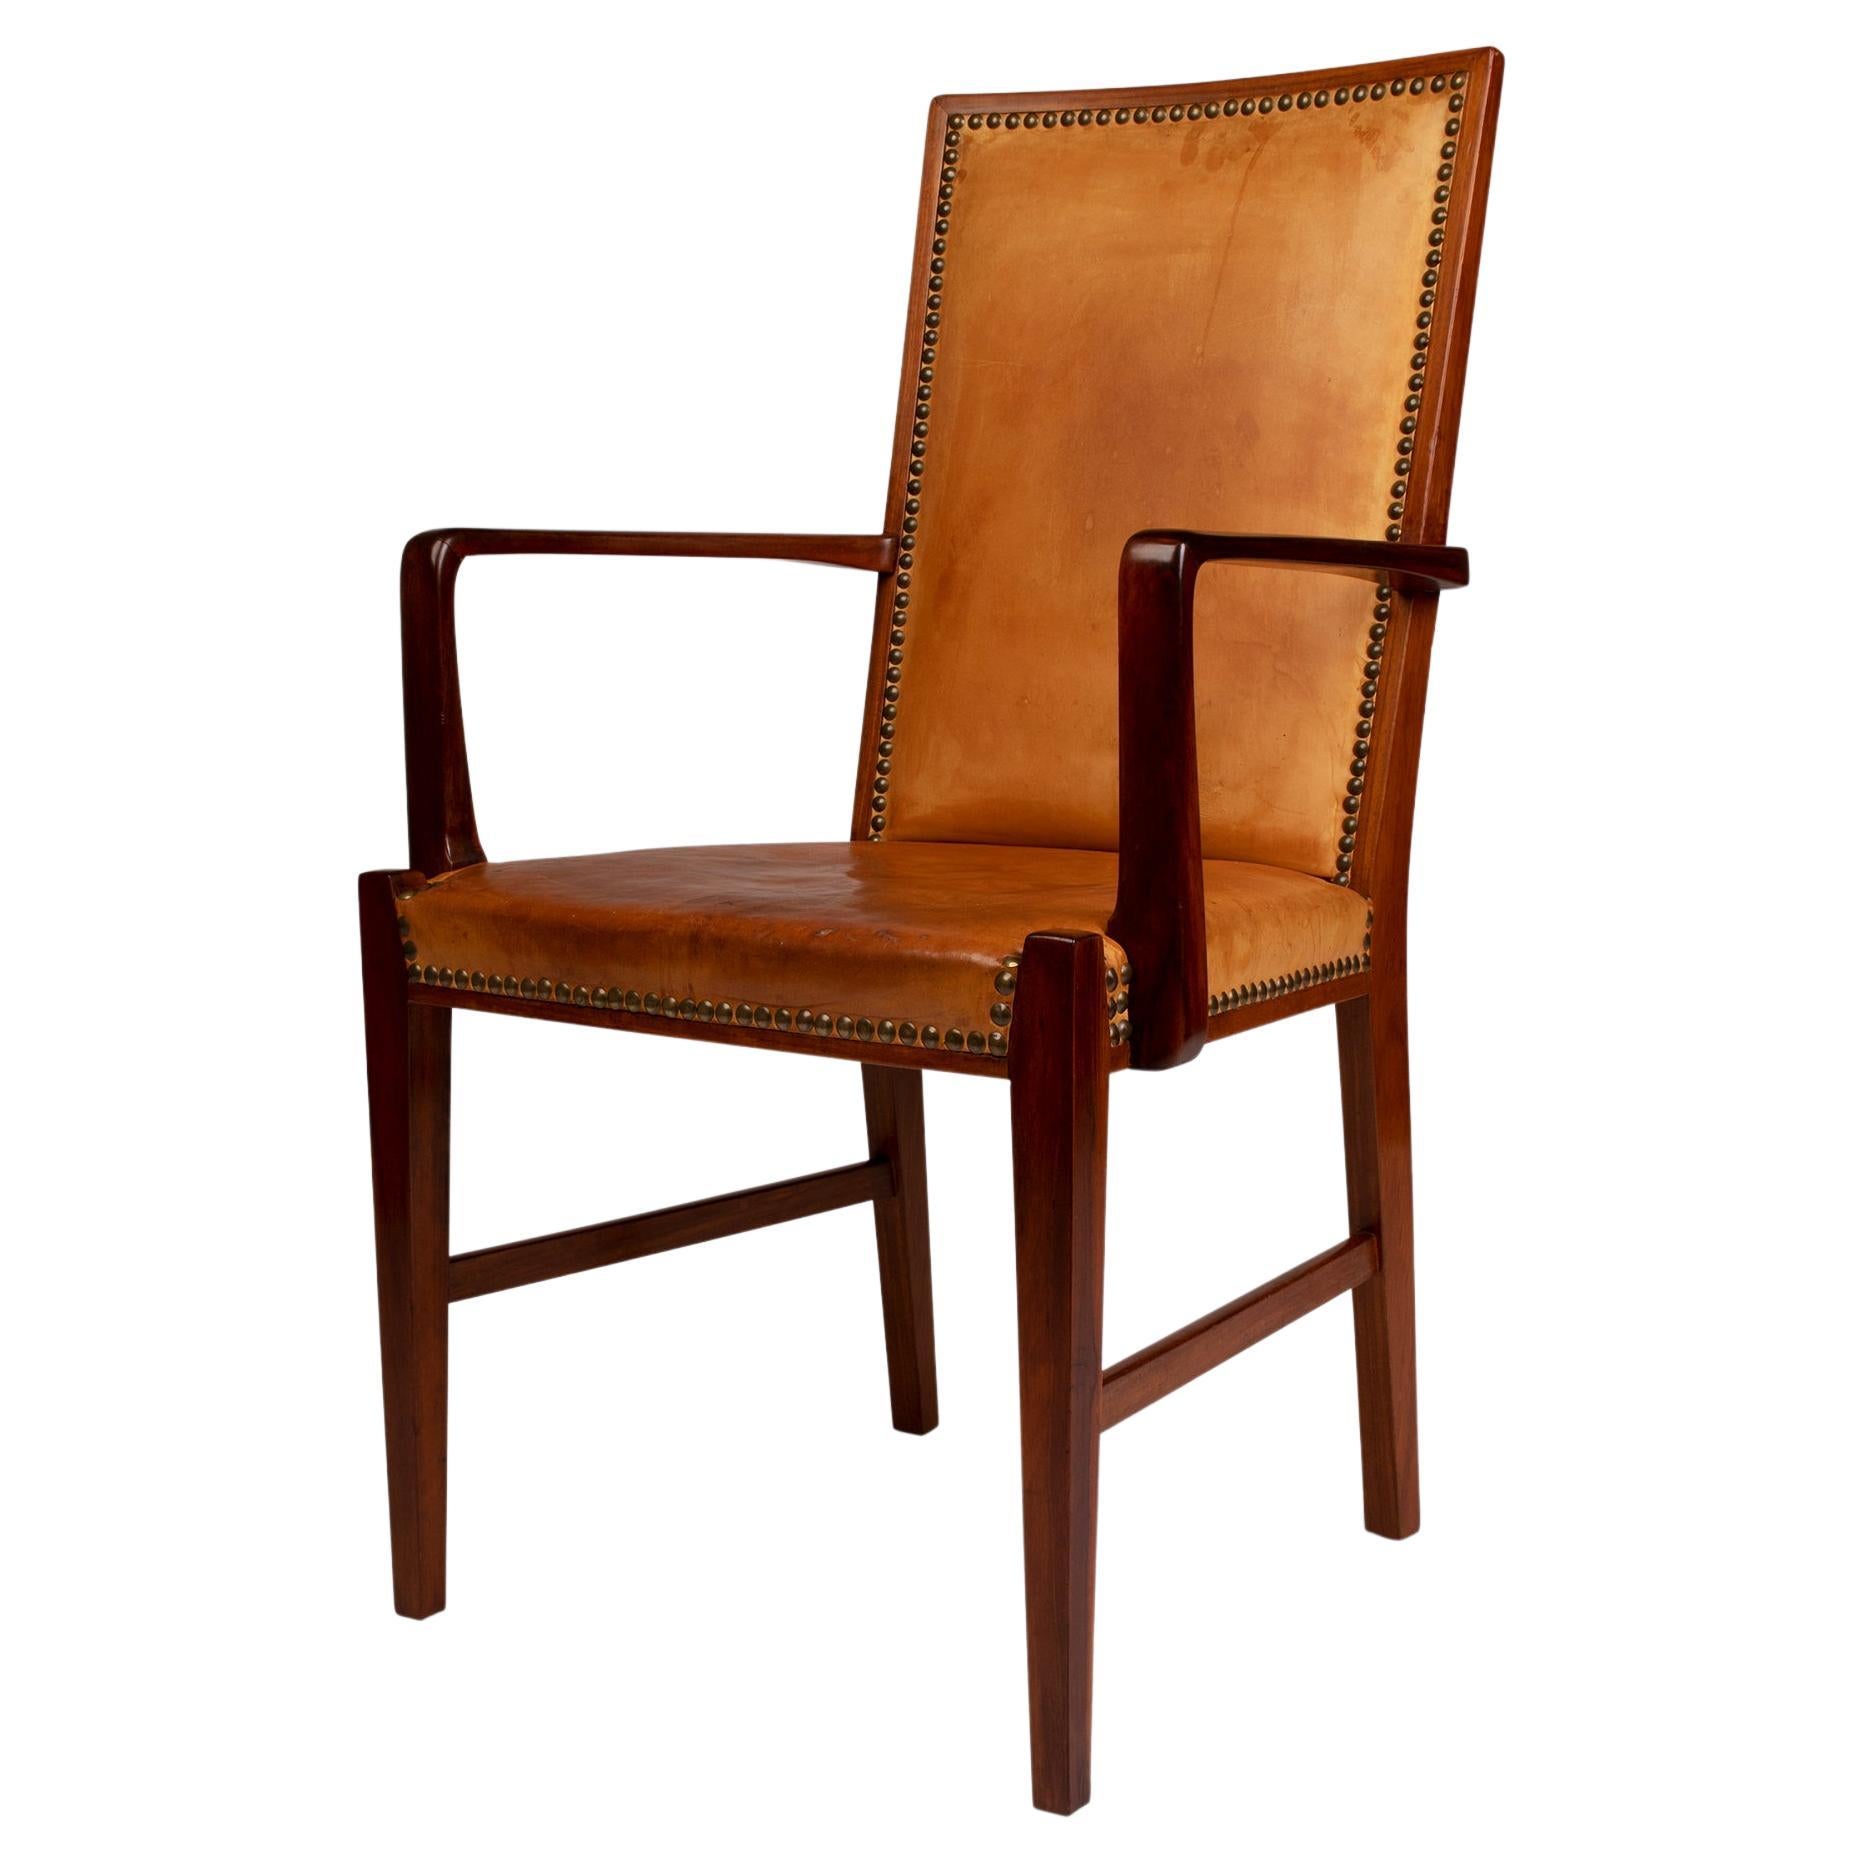 High back nut wood armchair with leather seat and back by Danish cabinetmaker For Sale